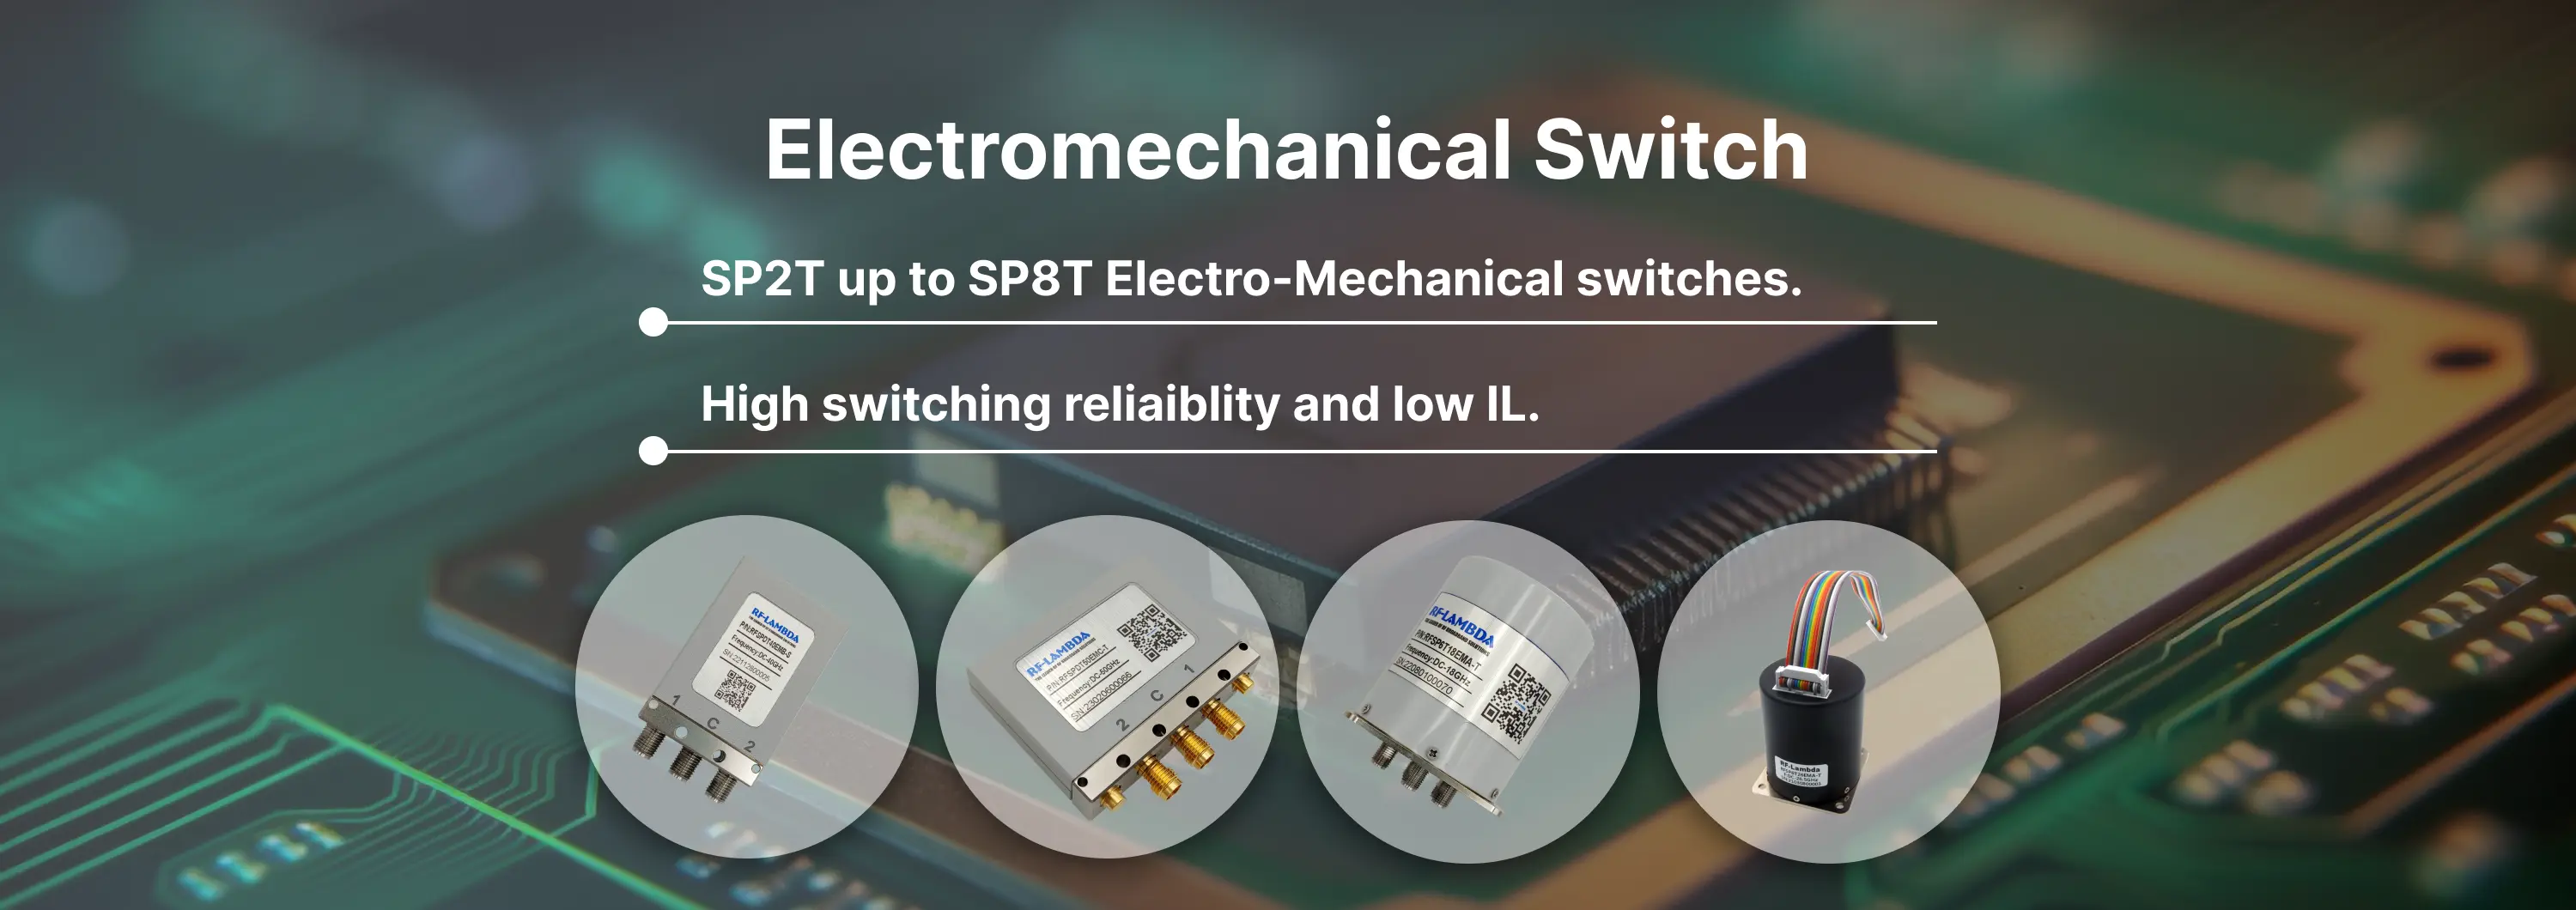 Electromechanical Switch Banner